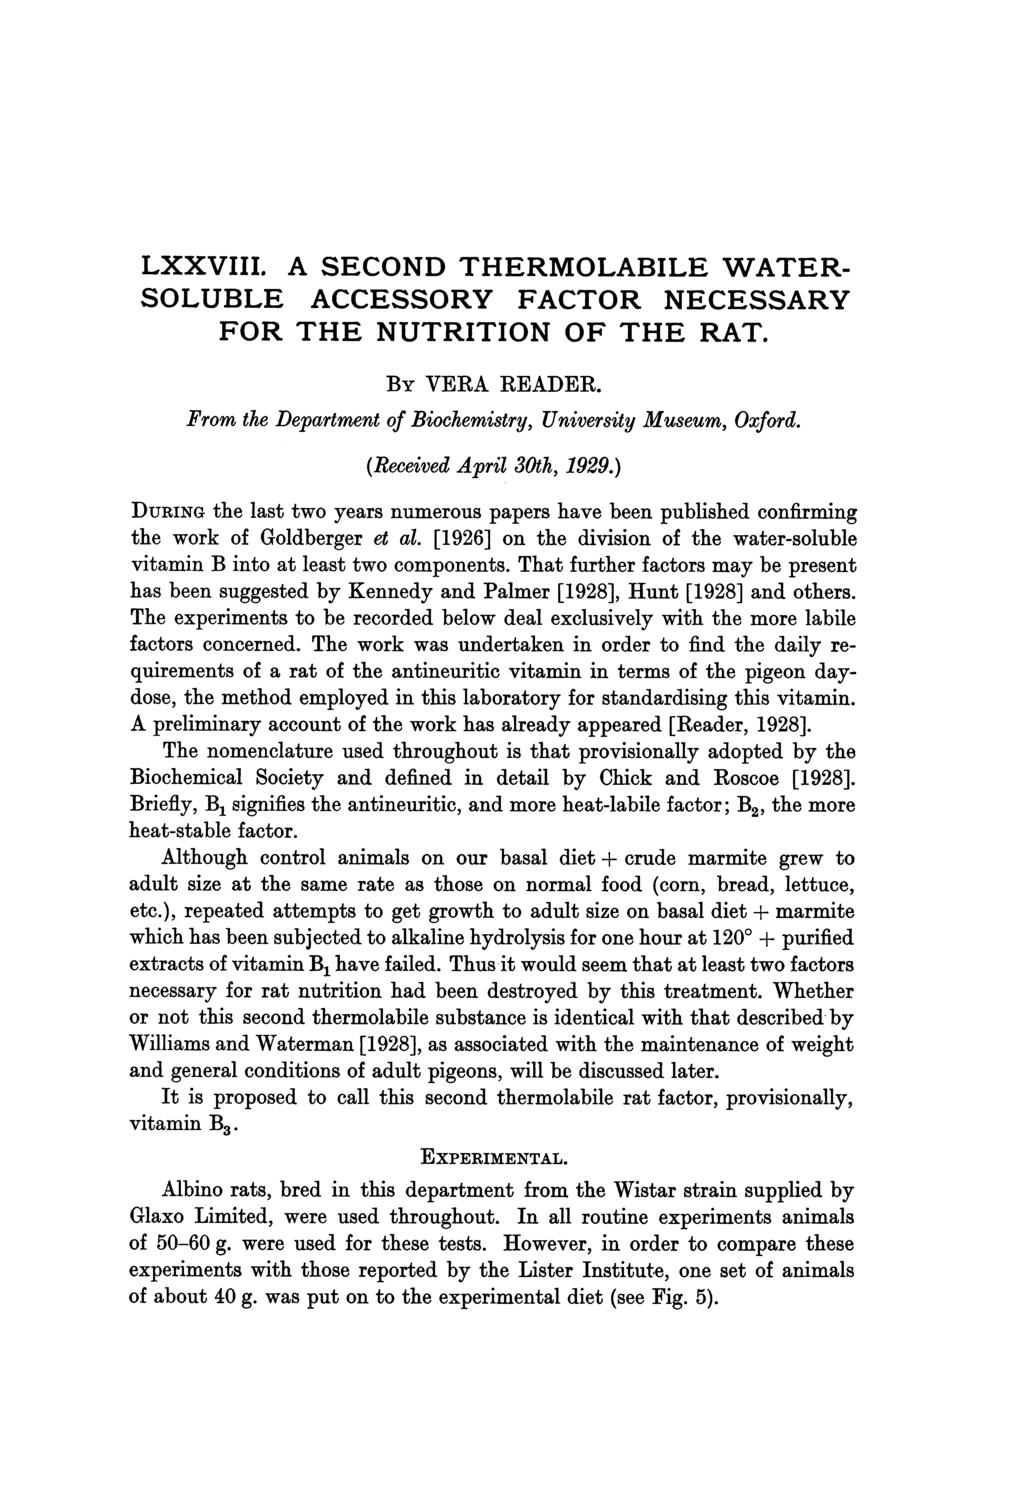 LXXVIII. A SECOND THERMOLABILE WATER- SOLUBLE ACCESSORY FACTOR NECESSARY FOR THE NUTRITION OF THE RAT. By VERA READER. From the Department of Biochemistry, University Museum, Oxford.